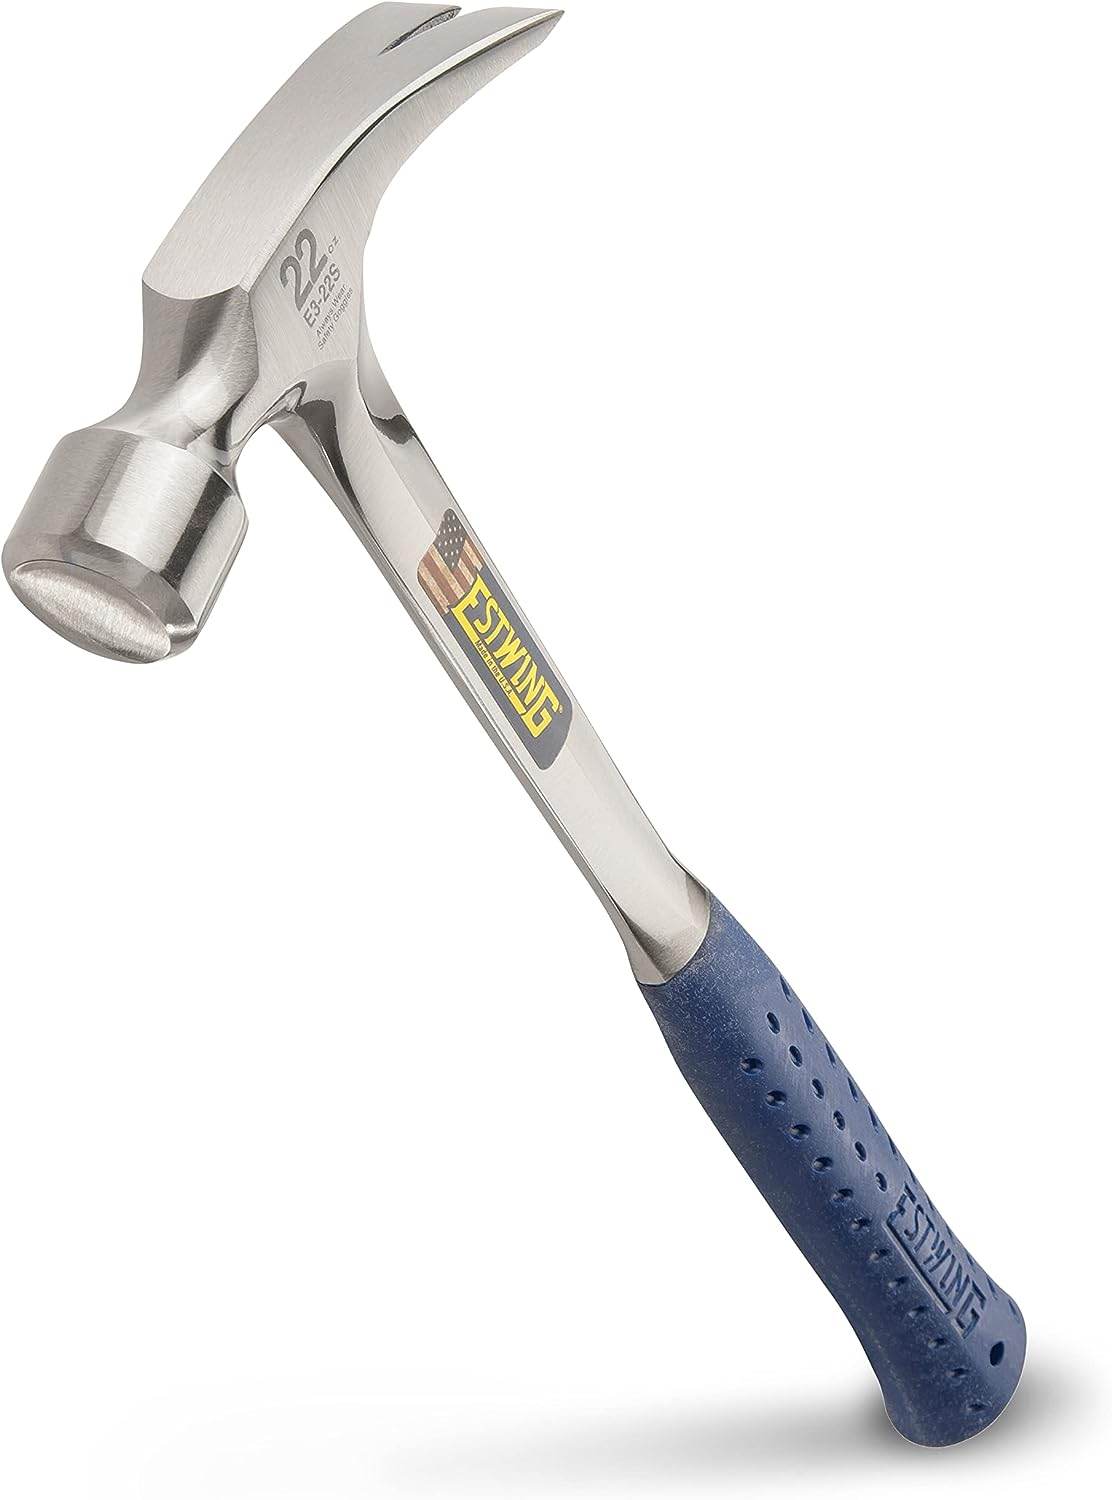 Estwing Hammertooth Hammer - 22 oz Straight Rip Claw with Smooth Face &  Shock Reduction Grip - E6-22T, Blue